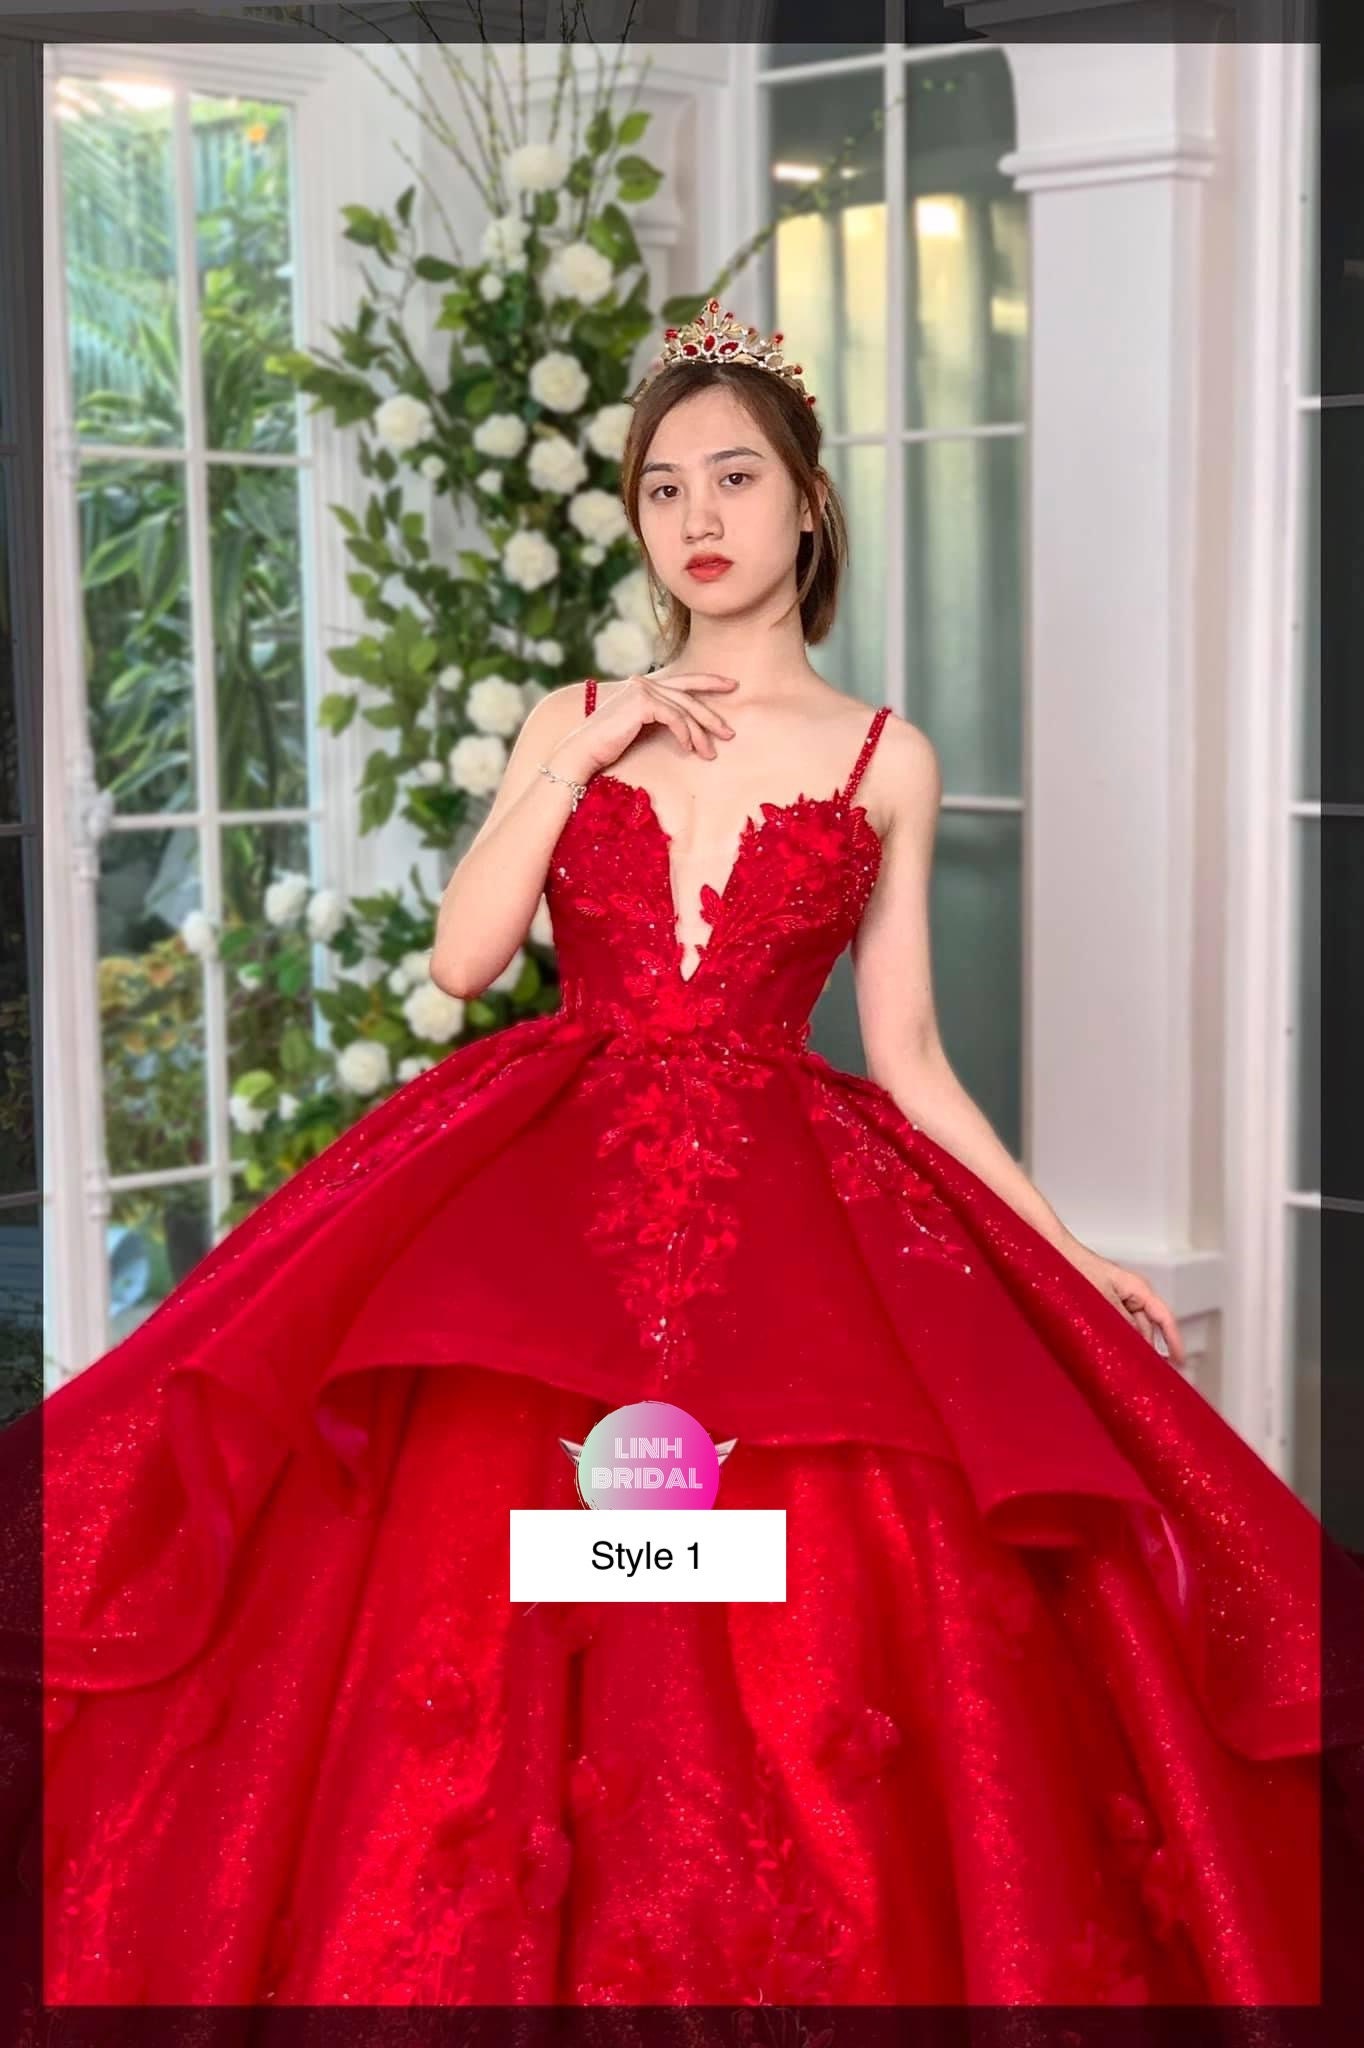 Breathtaking Red sleeveless ballgown wedding/debut dress with cathedral  train or tiered skirt